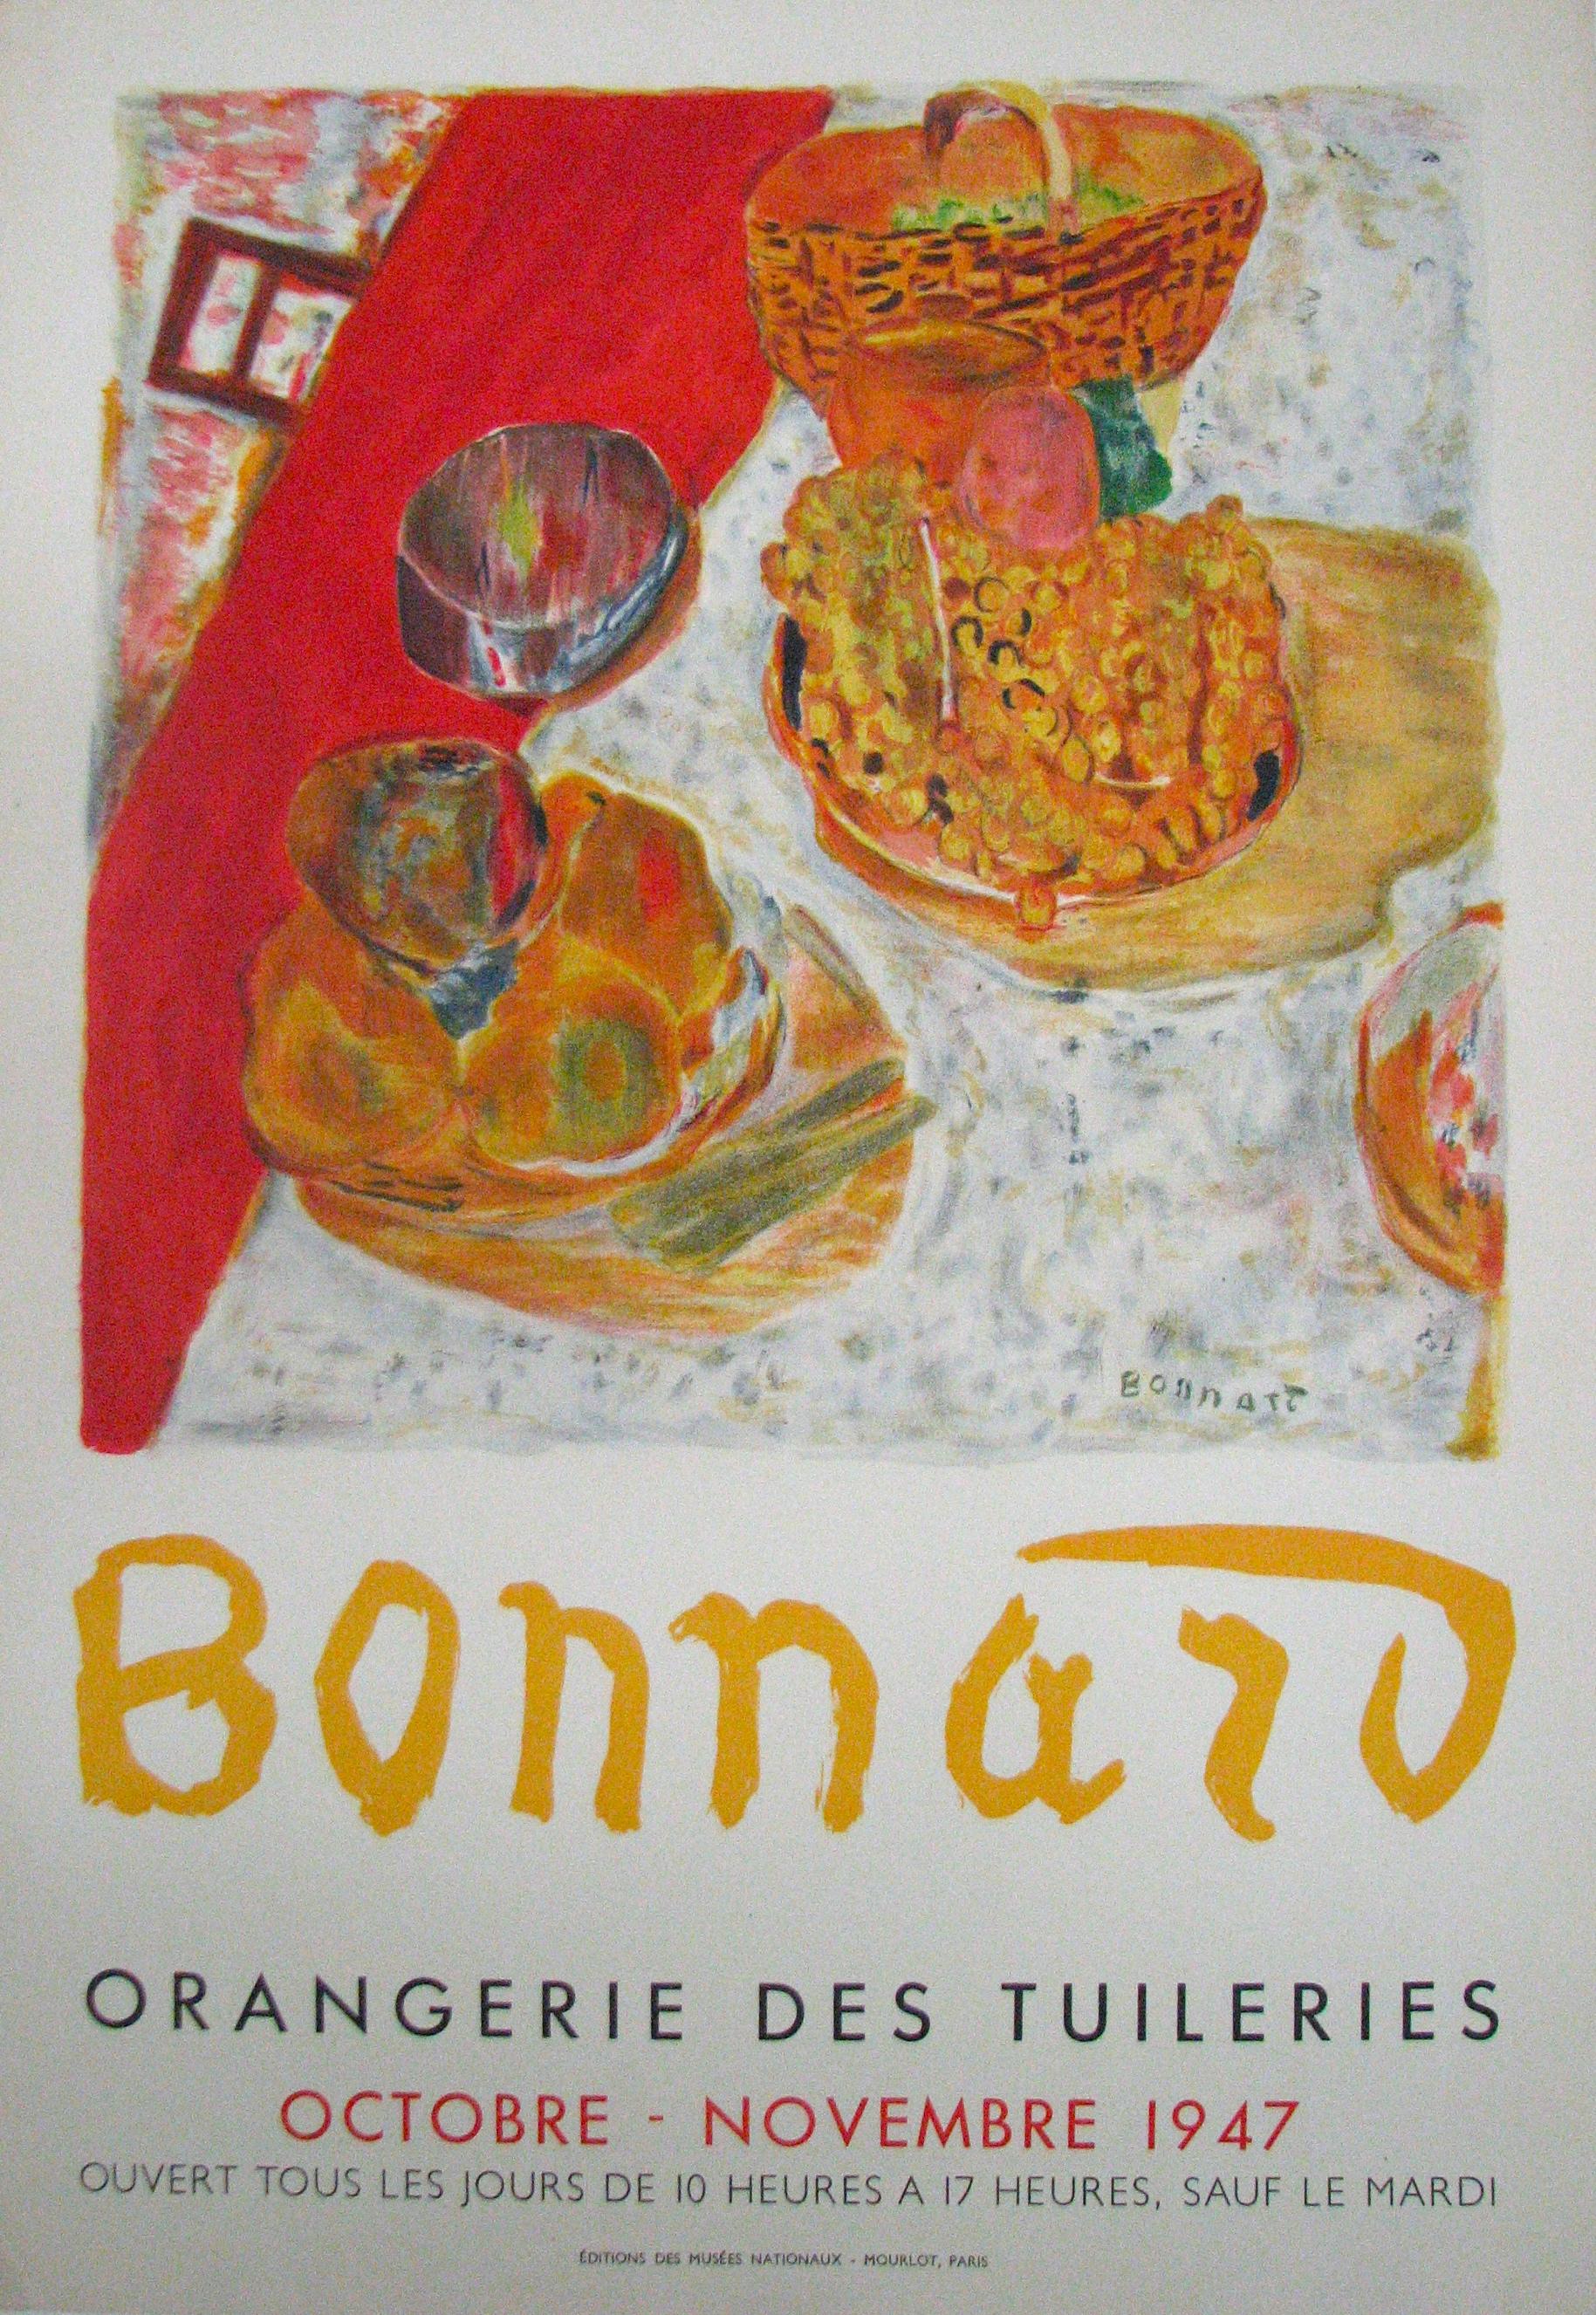 This original lithographic poster was designed after Pierre Bonnard, for the Orangerie Des Tuileries in 1947. This work encompasses still life as this table set takes center stage.

Bonnard was a founding member of the Post-Impressionist group of